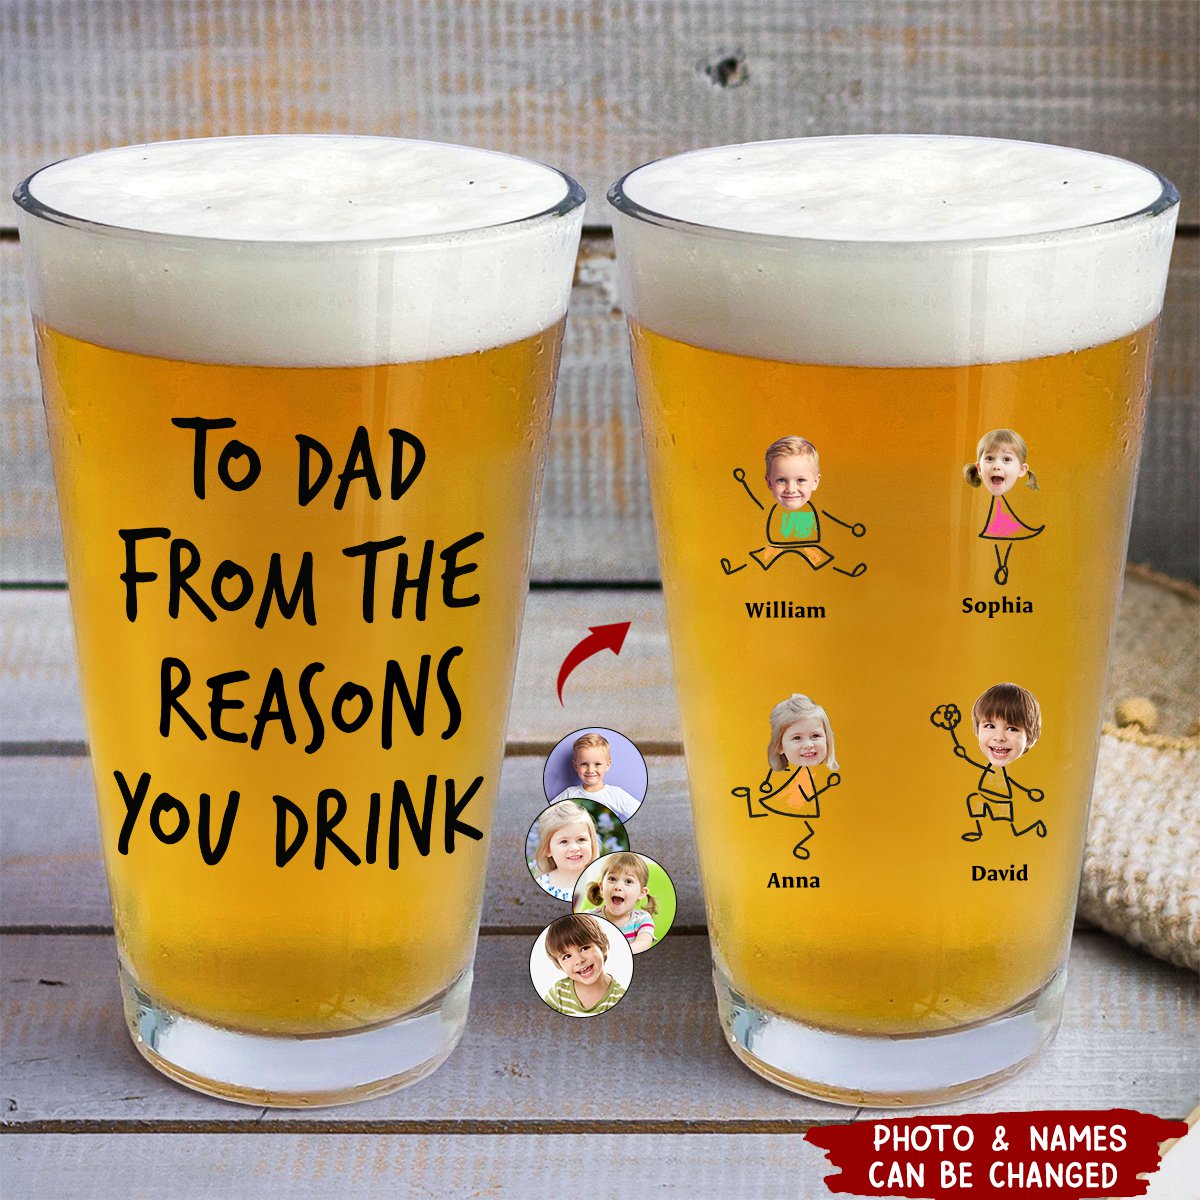 To Dad From The Reasons You Drink - Personalized Photo Beer Glass